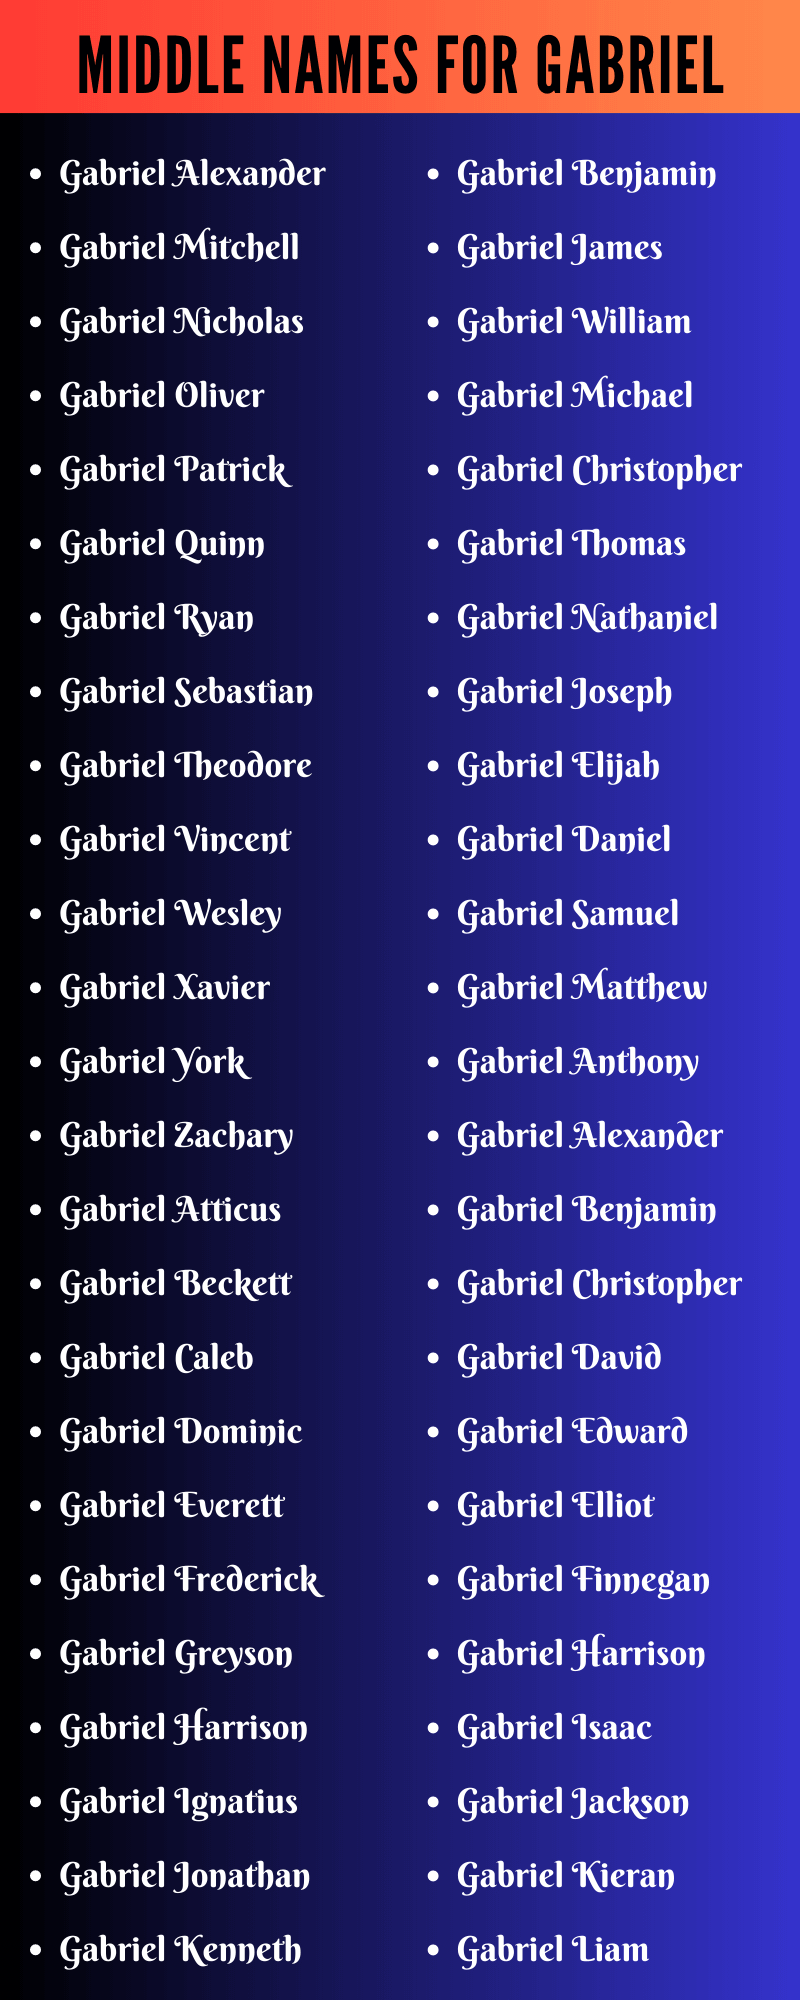 Middle Names For Gabriel